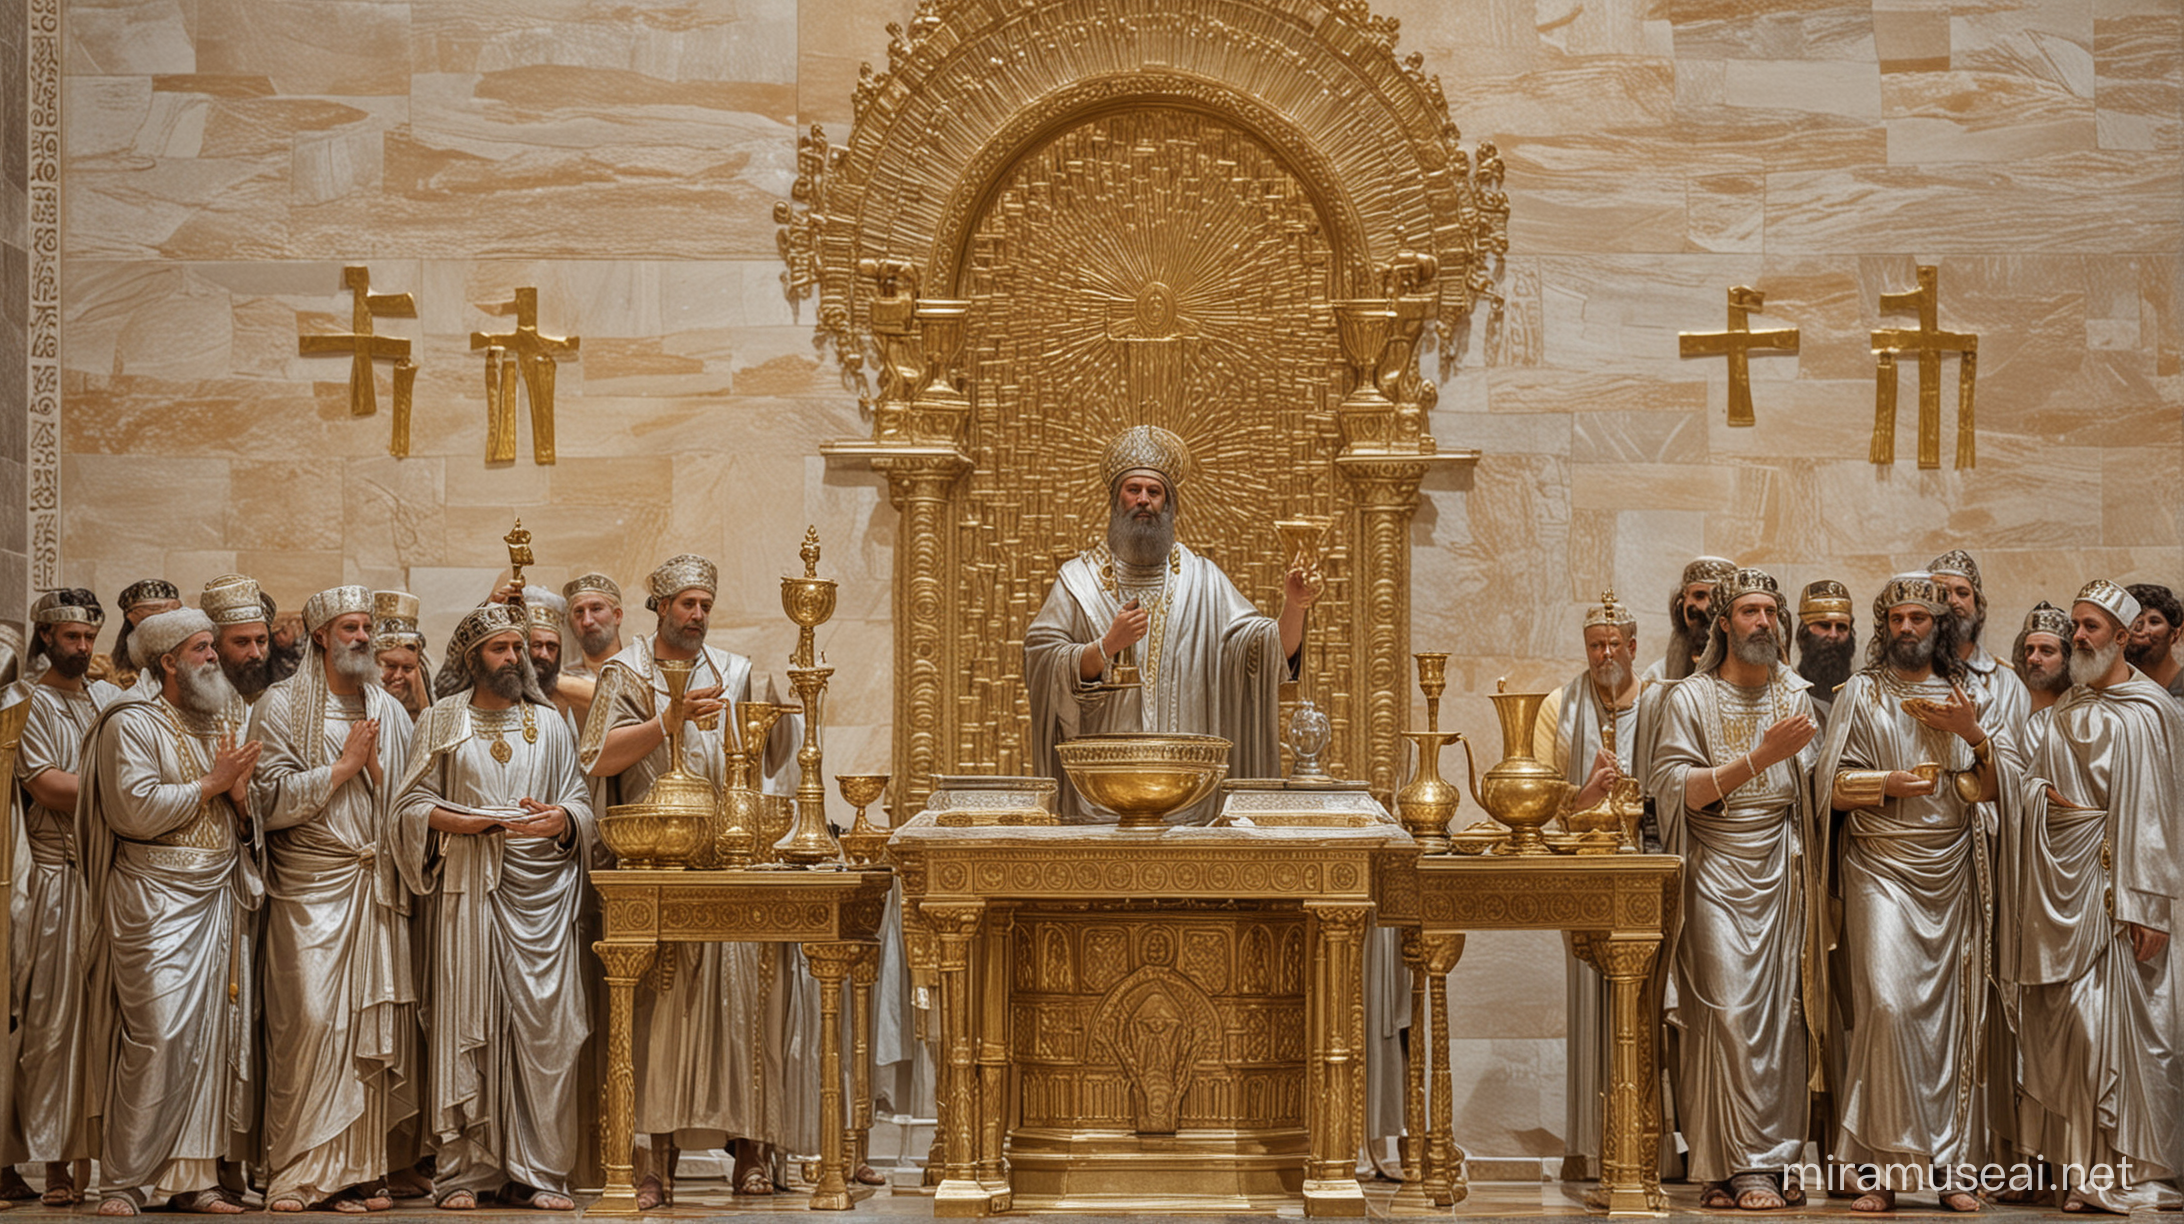 Moses Era Altar Dedication Priestly Ritual with Silver and Gold Vessels